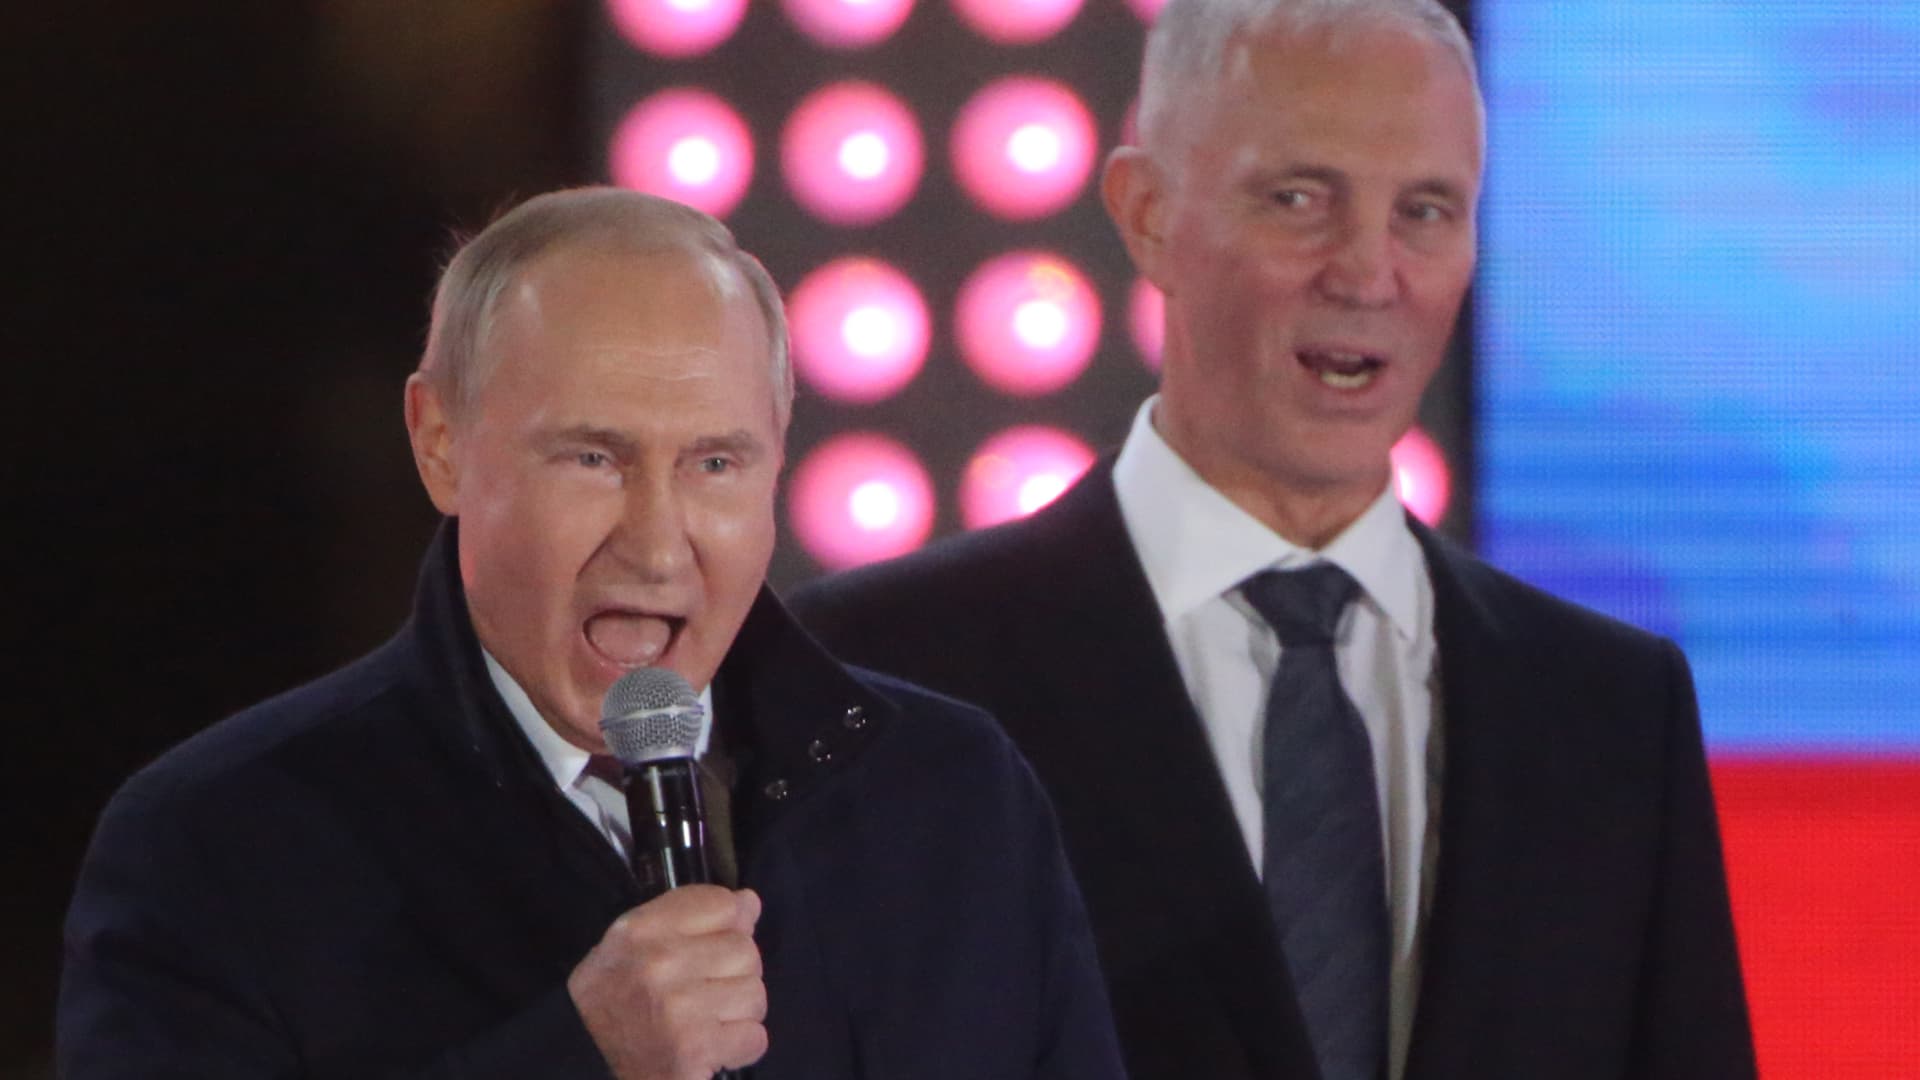 Russian President Vladimir Putin speaks as separatist leader Vladimir Saldo of the Kherson region listens during a concert in support of the annexation of four Ukrainian regions at Red Square on Sept. 30, 2022 in Moscow, Russia.